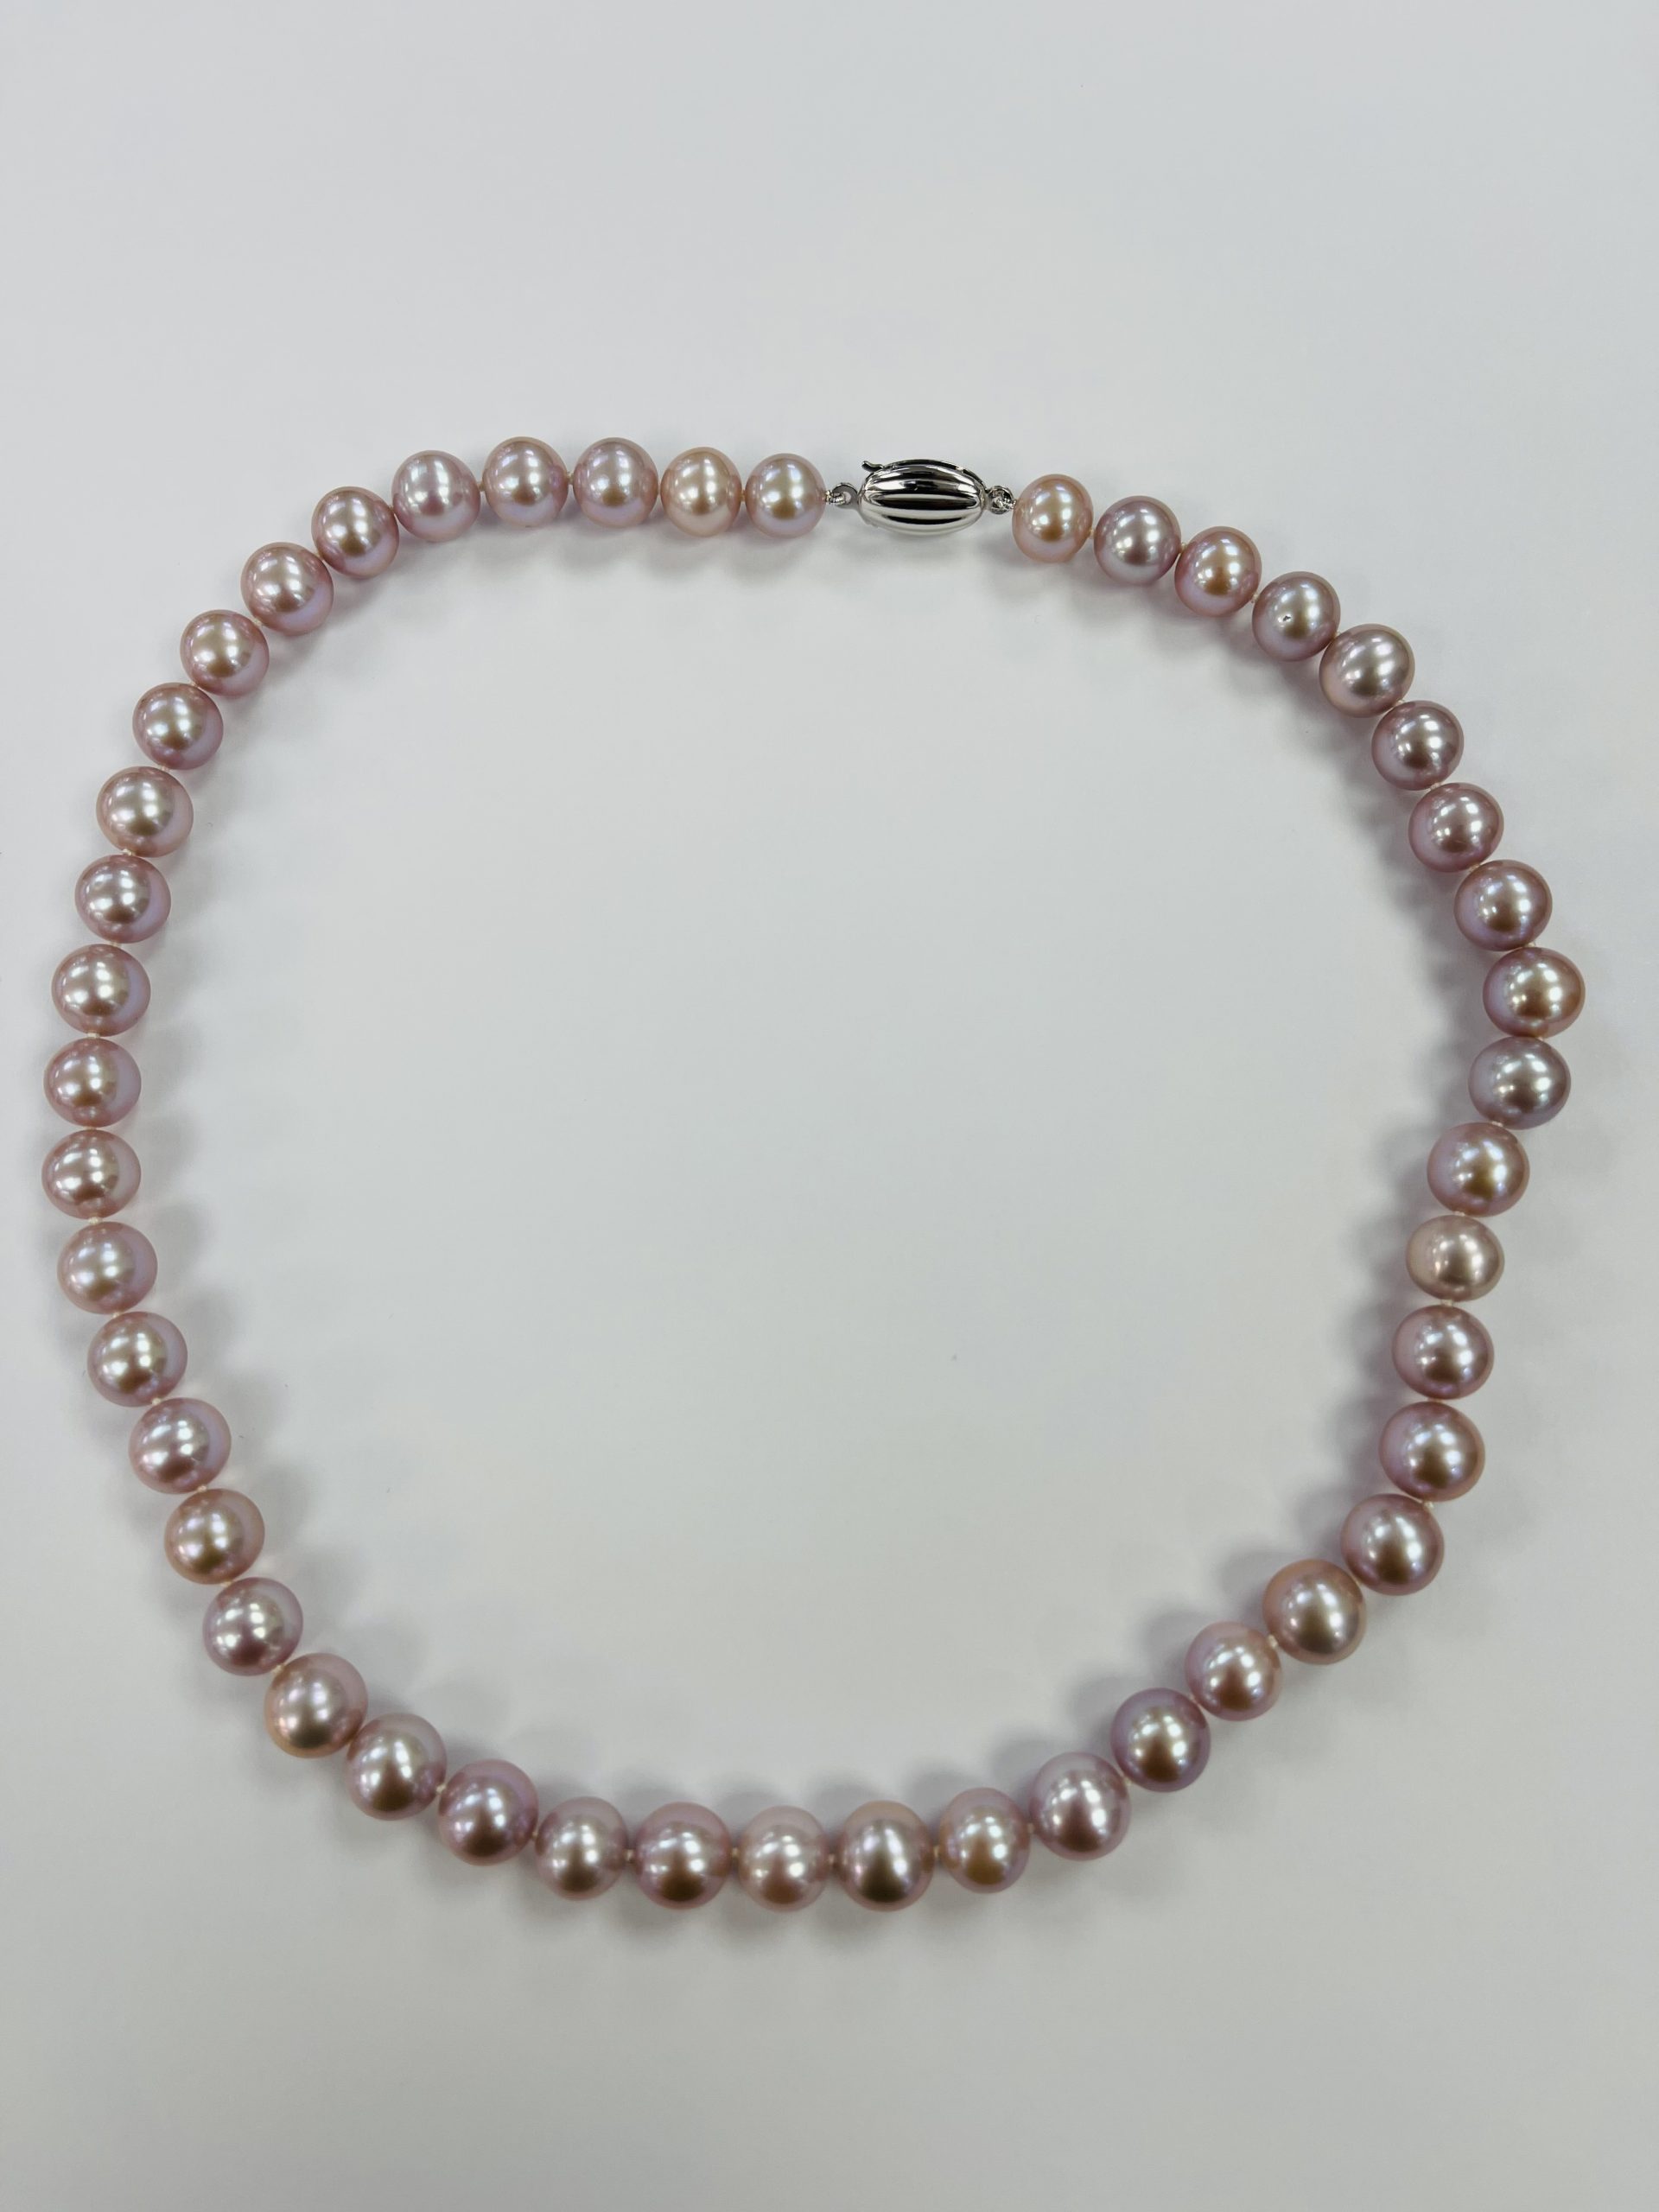 Diamond & Gold Jewellery Pink Freshwater 9-9.5mm Cultured Pearls with 9ct White Gold Clasp